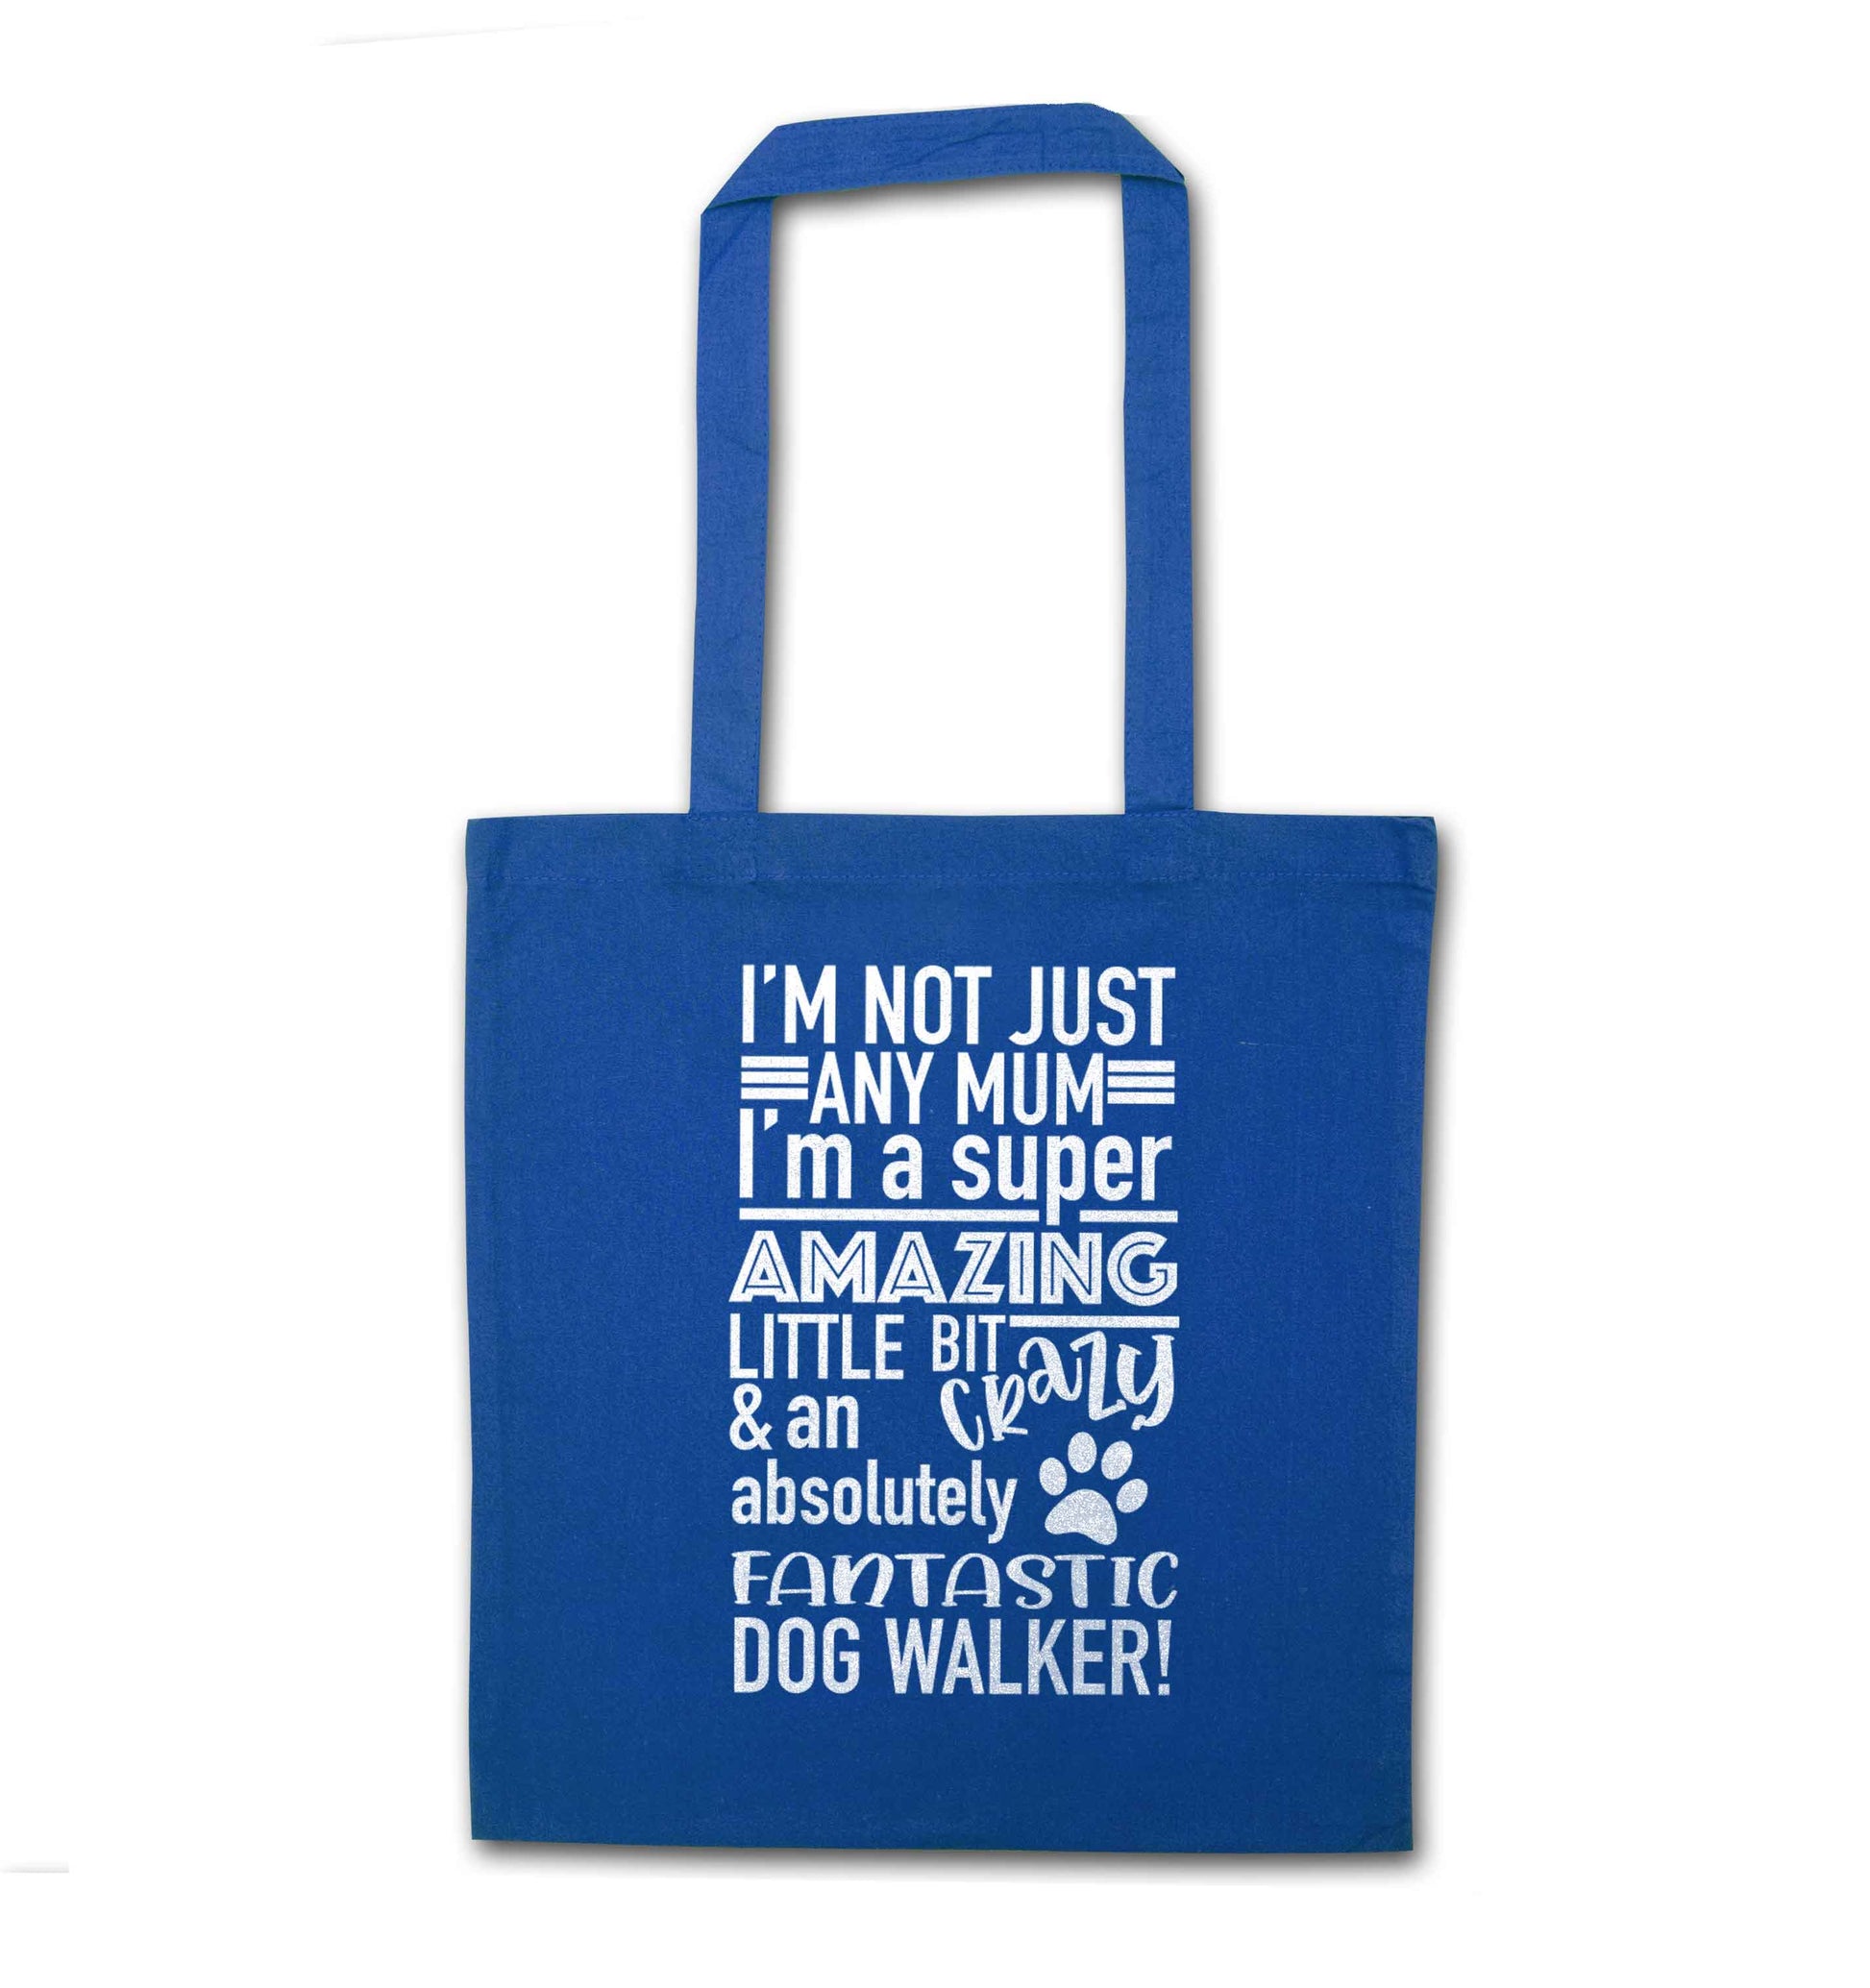 I'm not just any mum I'm a super amazing little bit crazy and an absolutely fantastic dog walker! blue tote bag